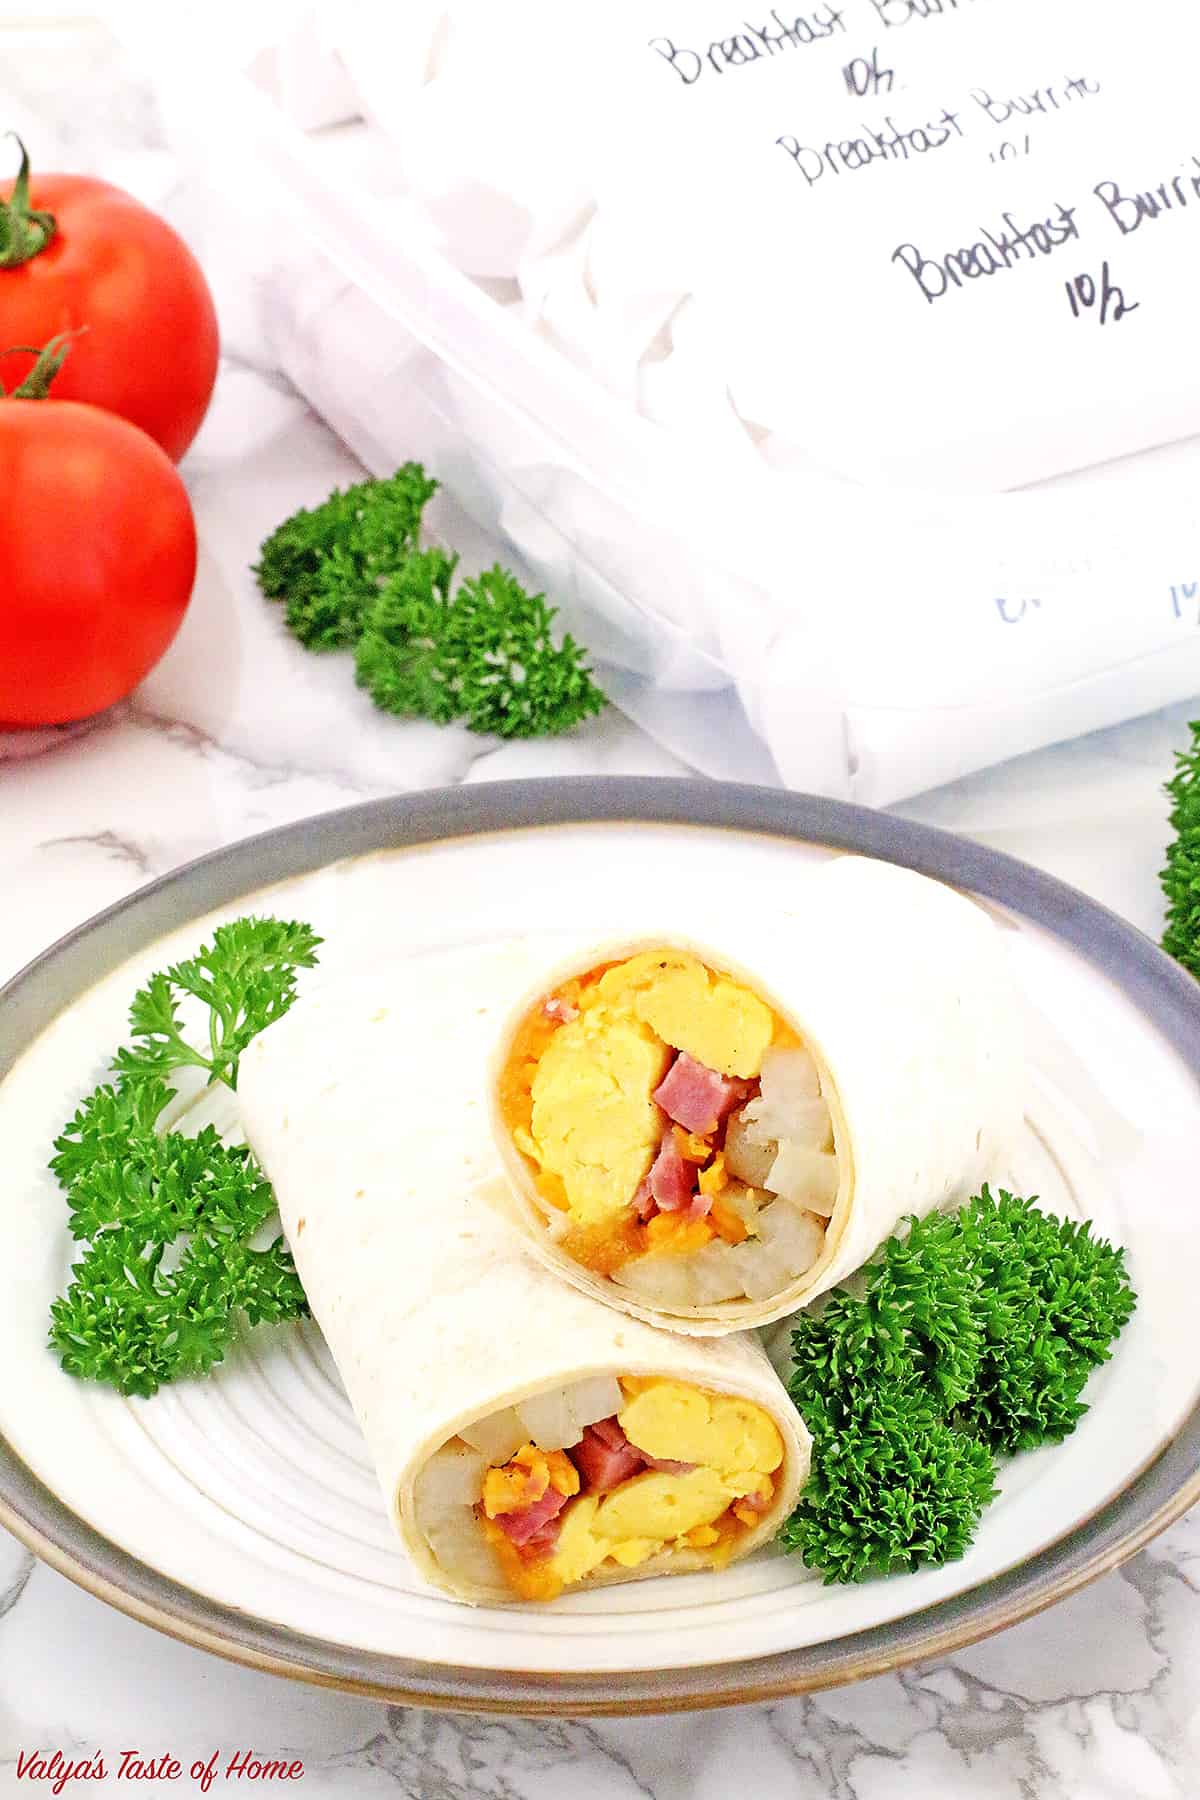 These Make-Ahead Breakfast Burritos are super easy to put together and brilliant for busy schedules. All the breakfast taste, zero-time spent cooking. It doesn't get any easier than this: reheat and eat!